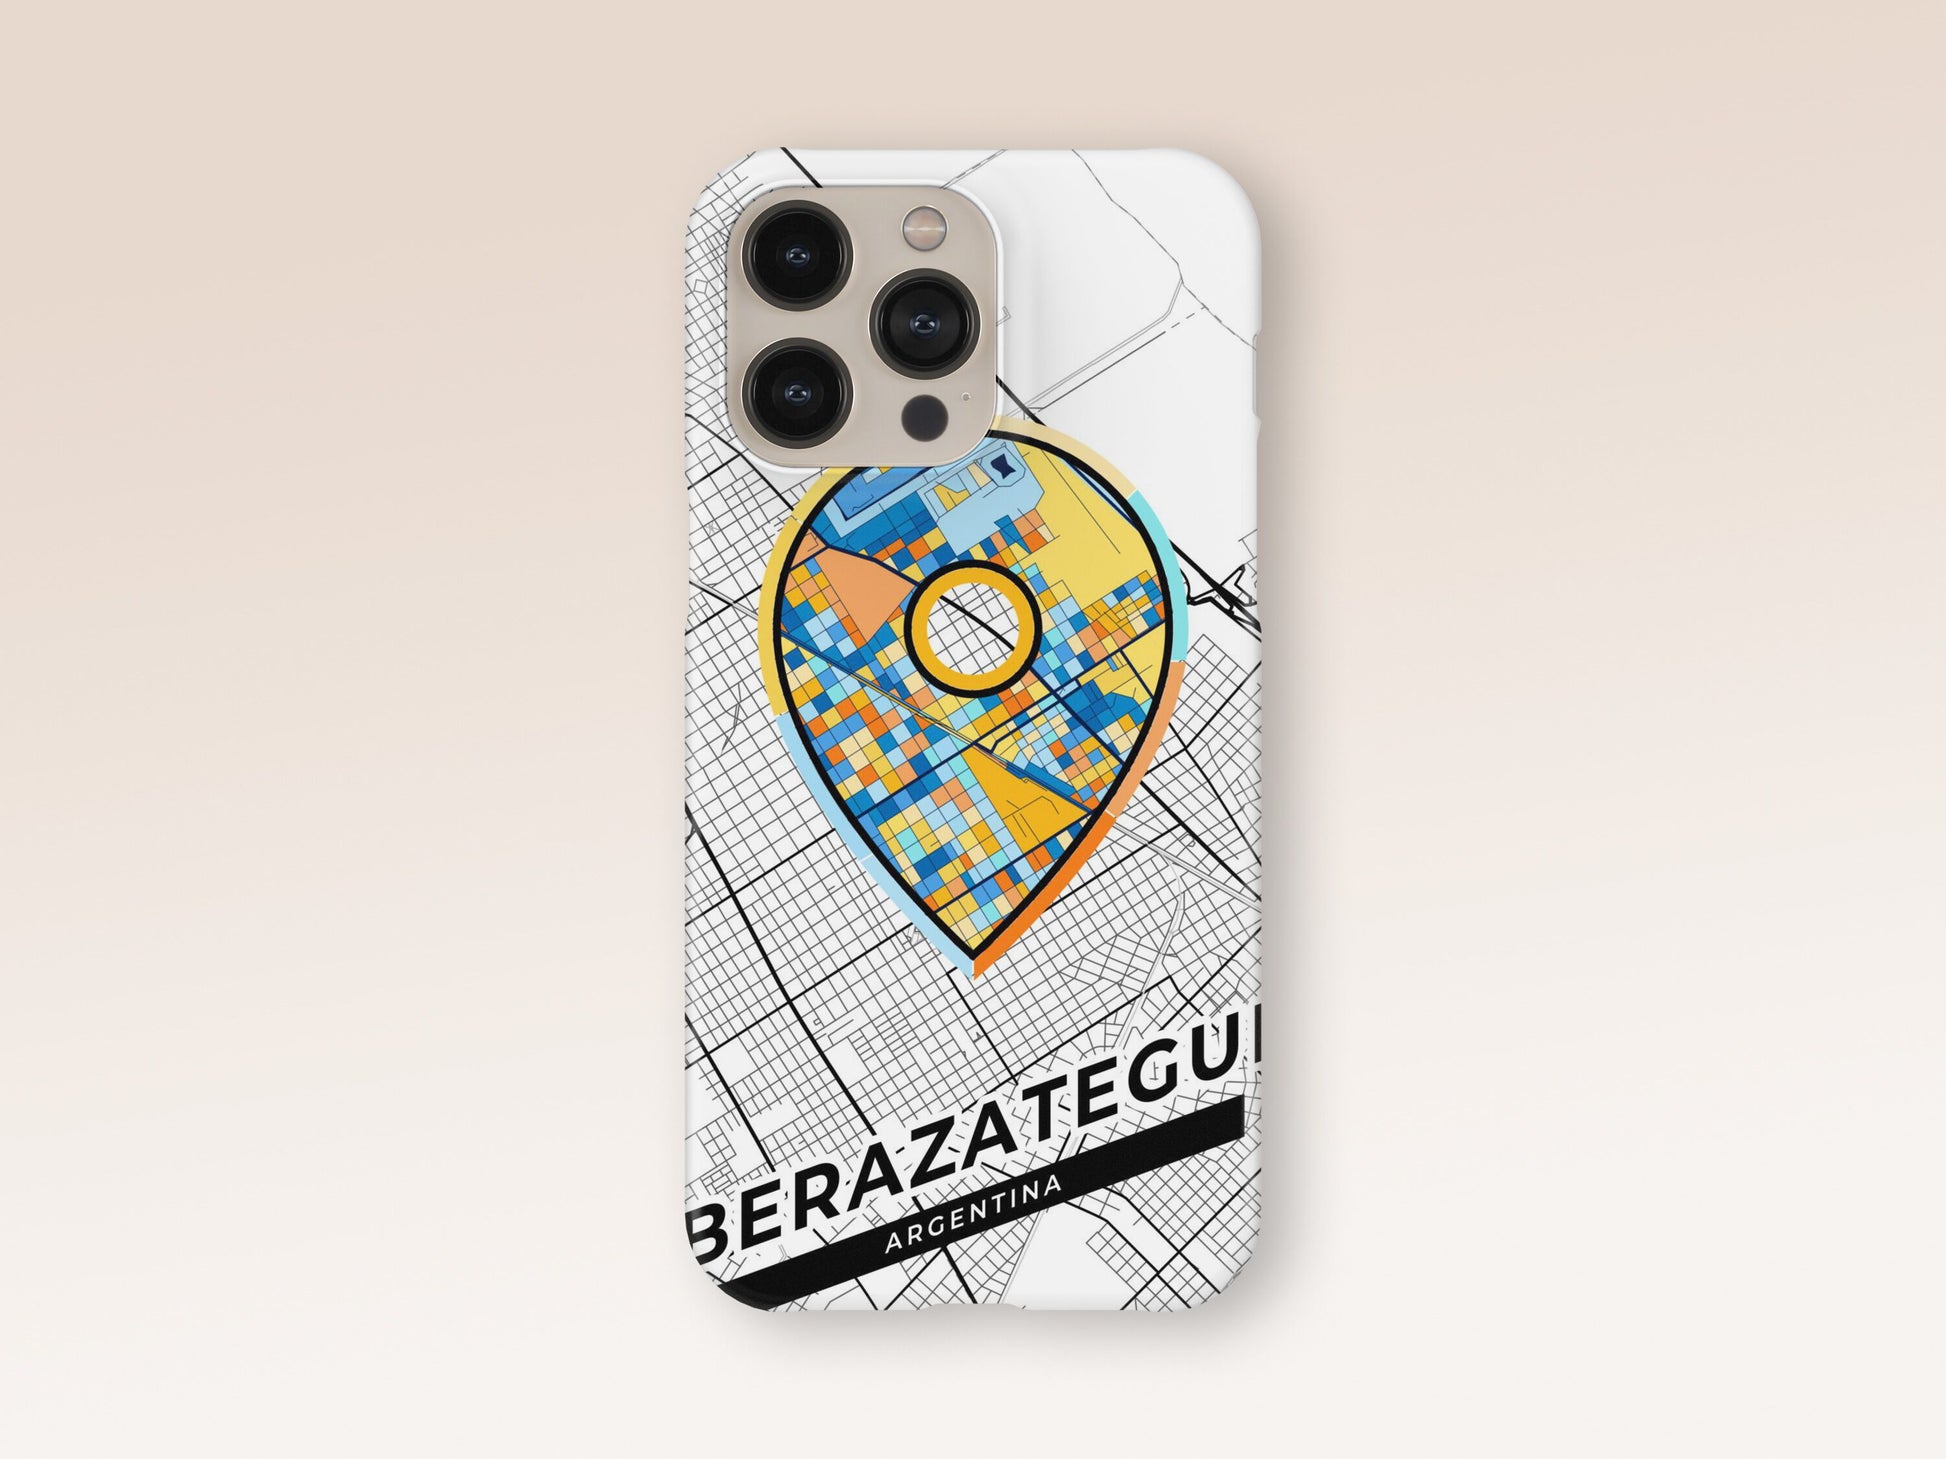 Berazategui Argentina slim phone case with colorful icon. Birthday, wedding or housewarming gift. Couple match cases. 1